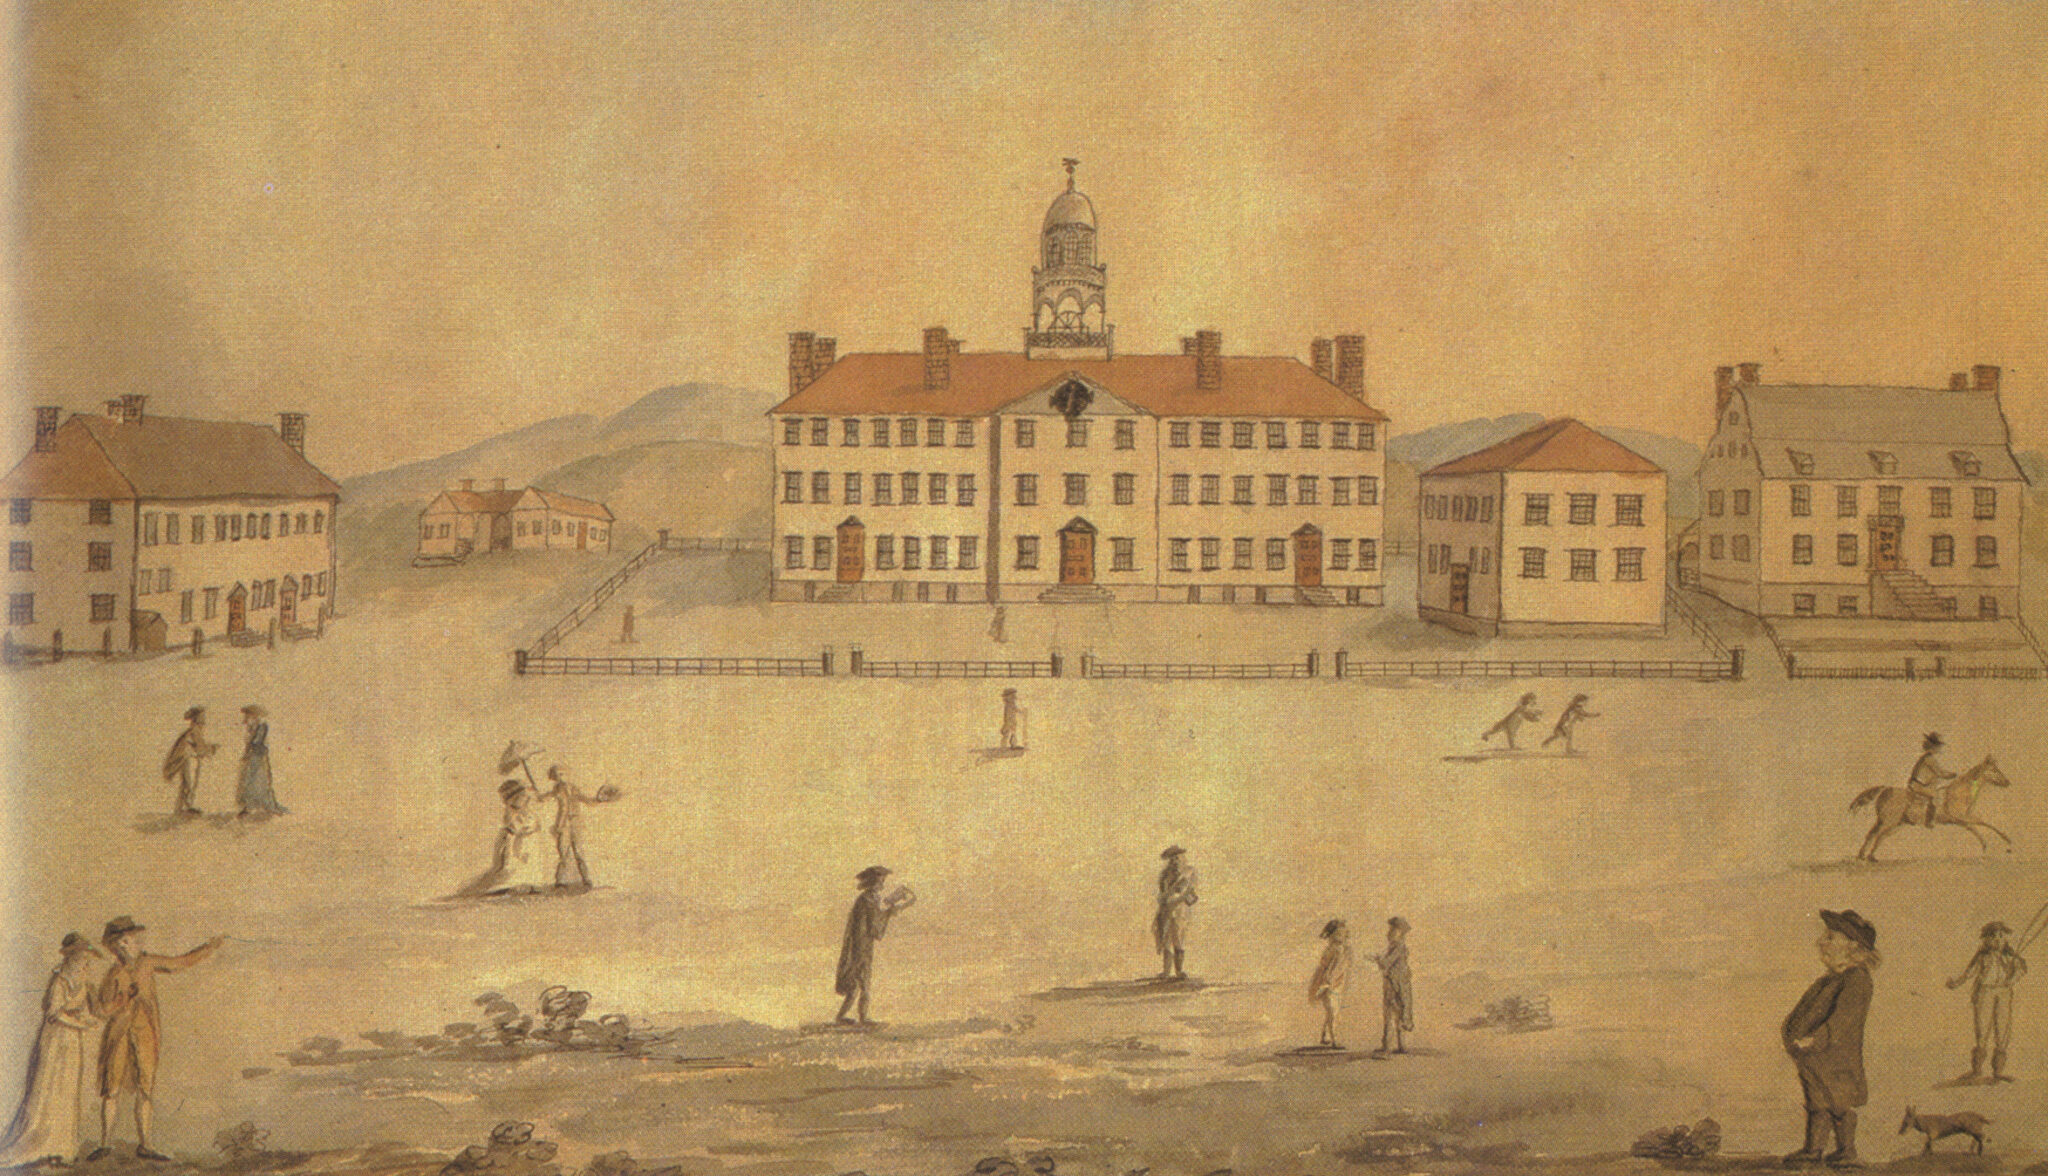  A View of Dartmouth College by George Ticknor, 1803